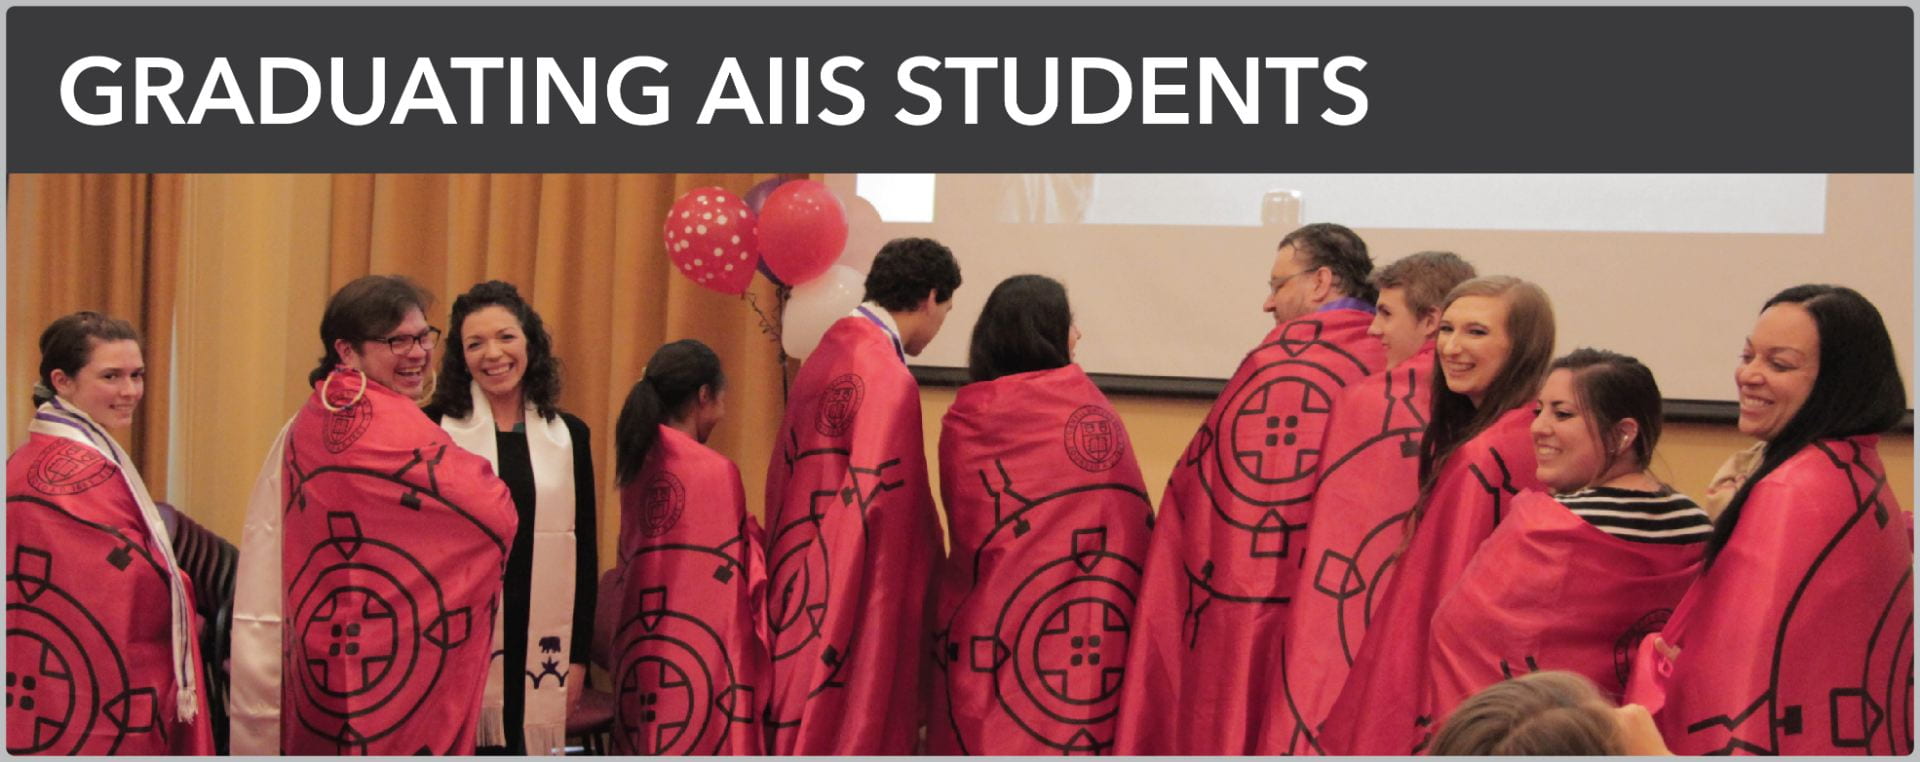 Graduating AIIS students banner with link to page